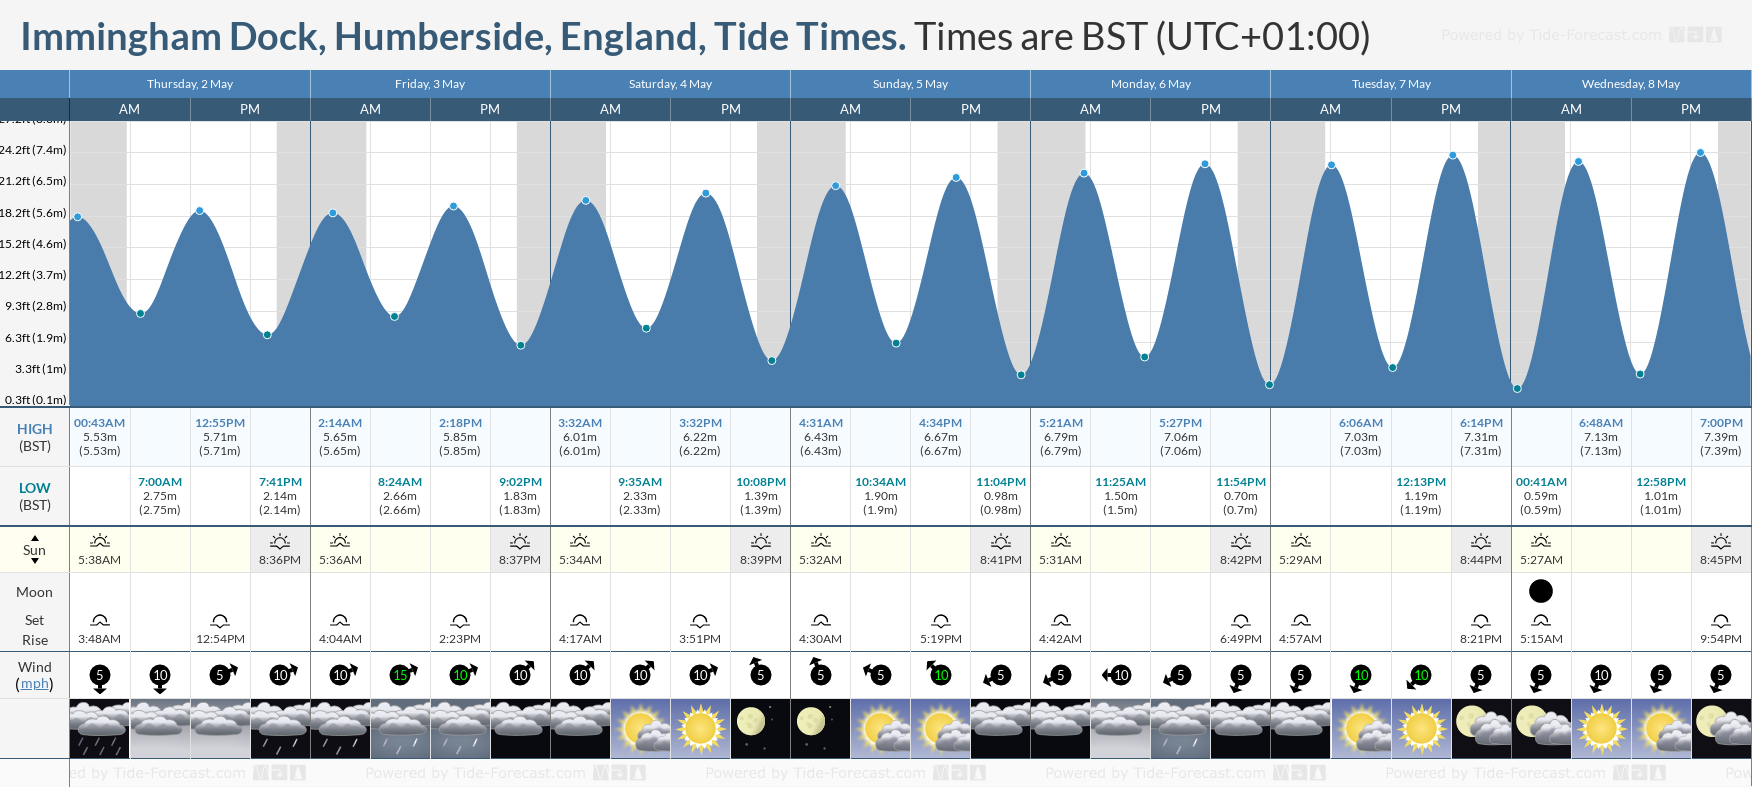 Immingham Dock, Humberside, England Tide Chart including high and low tide tide times for the next 7 days